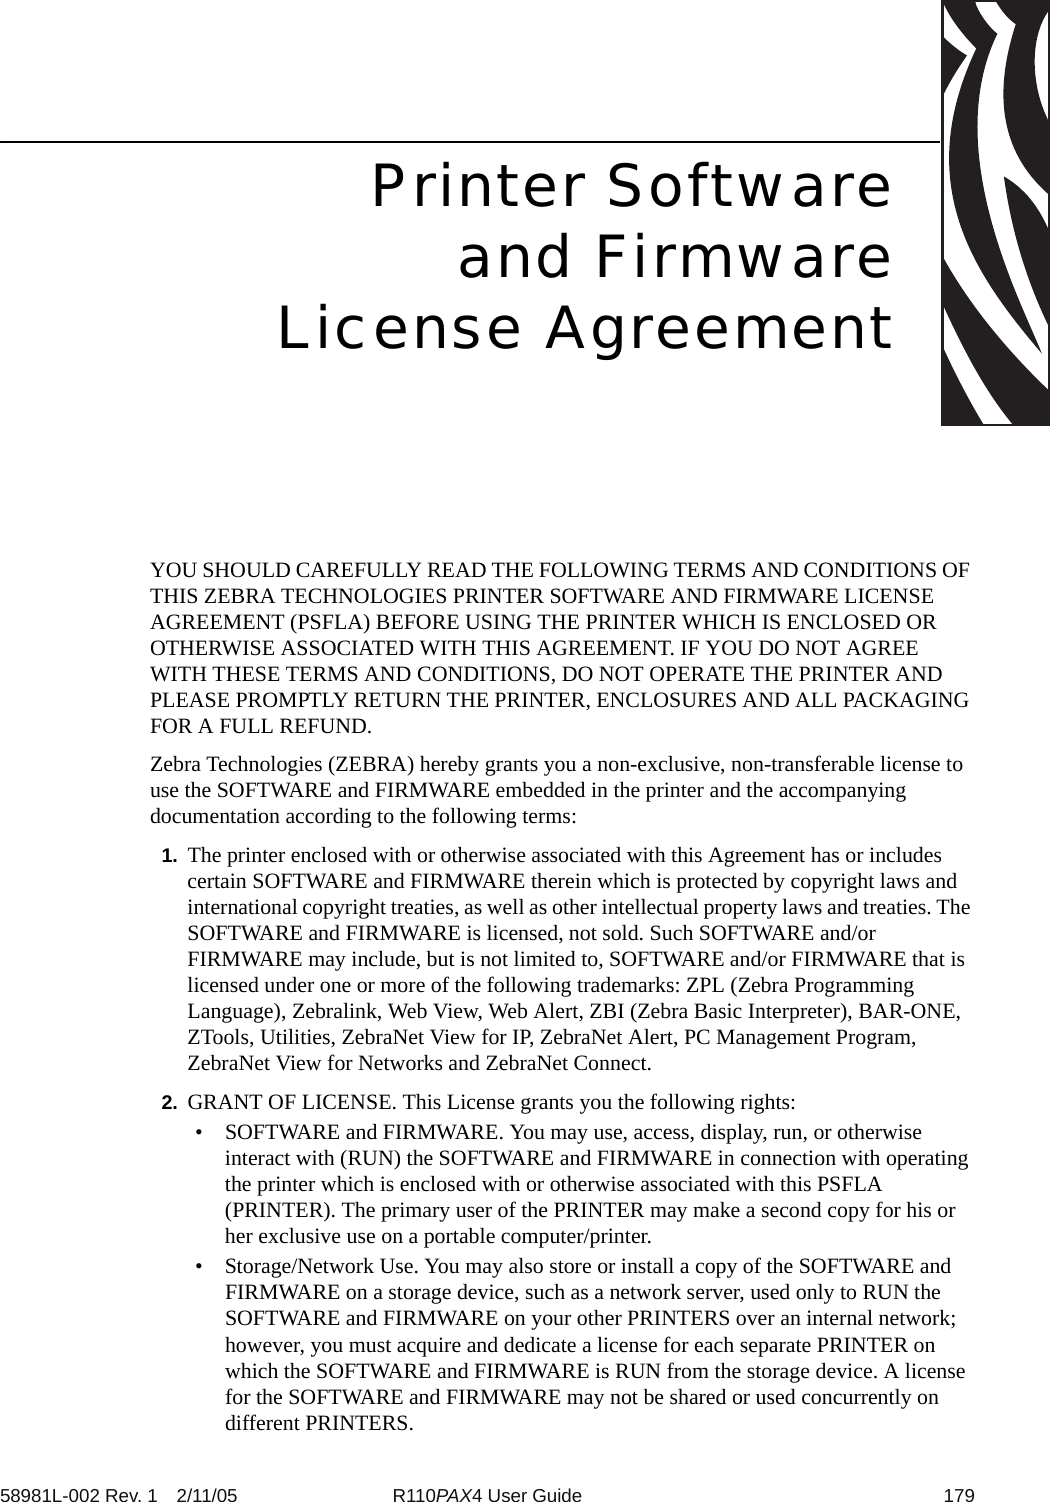 58981L-002 Rev. 1 2/11/05 R110PAX4 User Guide 179Printer Softwareand FirmwareLicense AgreementYOU SHOULD CAREFULLY READ THE FOLLOWING TERMS AND CONDITIONS OF THIS ZEBRA TECHNOLOGIES PRINTER SOFTWARE AND FIRMWARE LICENSE AGREEMENT (PSFLA) BEFORE USING THE PRINTER WHICH IS ENCLOSED OR OTHERWISE ASSOCIATED WITH THIS AGREEMENT. IF YOU DO NOT AGREE WITH THESE TERMS AND CONDITIONS, DO NOT OPERATE THE PRINTER AND PLEASE PROMPTLY RETURN THE PRINTER, ENCLOSURES AND ALL PACKAGING FOR A FULL REFUND.Zebra Technologies (ZEBRA) hereby grants you a non-exclusive, non-transferable license to use the SOFTWARE and FIRMWARE embedded in the printer and the accompanying documentation according to the following terms:1. The printer enclosed with or otherwise associated with this Agreement has or includes certain SOFTWARE and FIRMWARE therein which is protected by copyright laws and international copyright treaties, as well as other intellectual property laws and treaties. The SOFTWARE and FIRMWARE is licensed, not sold. Such SOFTWARE and/or FIRMWARE may include, but is not limited to, SOFTWARE and/or FIRMWARE that is licensed under one or more of the following trademarks: ZPL (Zebra Programming Language), Zebralink, Web View, Web Alert, ZBI (Zebra Basic Interpreter), BAR-ONE, ZTools, Utilities, ZebraNet View for IP, ZebraNet Alert, PC Management Program, ZebraNet View for Networks and ZebraNet Connect. 2. GRANT OF LICENSE. This License grants you the following rights:• SOFTWARE and FIRMWARE. You may use, access, display, run, or otherwise interact with (RUN) the SOFTWARE and FIRMWARE in connection with operating the printer which is enclosed with or otherwise associated with this PSFLA (PRINTER). The primary user of the PRINTER may make a second copy for his or her exclusive use on a portable computer/printer.• Storage/Network Use. You may also store or install a copy of the SOFTWARE and FIRMWARE on a storage device, such as a network server, used only to RUN the SOFTWARE and FIRMWARE on your other PRINTERS over an internal network; however, you must acquire and dedicate a license for each separate PRINTER on which the SOFTWARE and FIRMWARE is RUN from the storage device. A license for the SOFTWARE and FIRMWARE may not be shared or used concurrently on different PRINTERS.